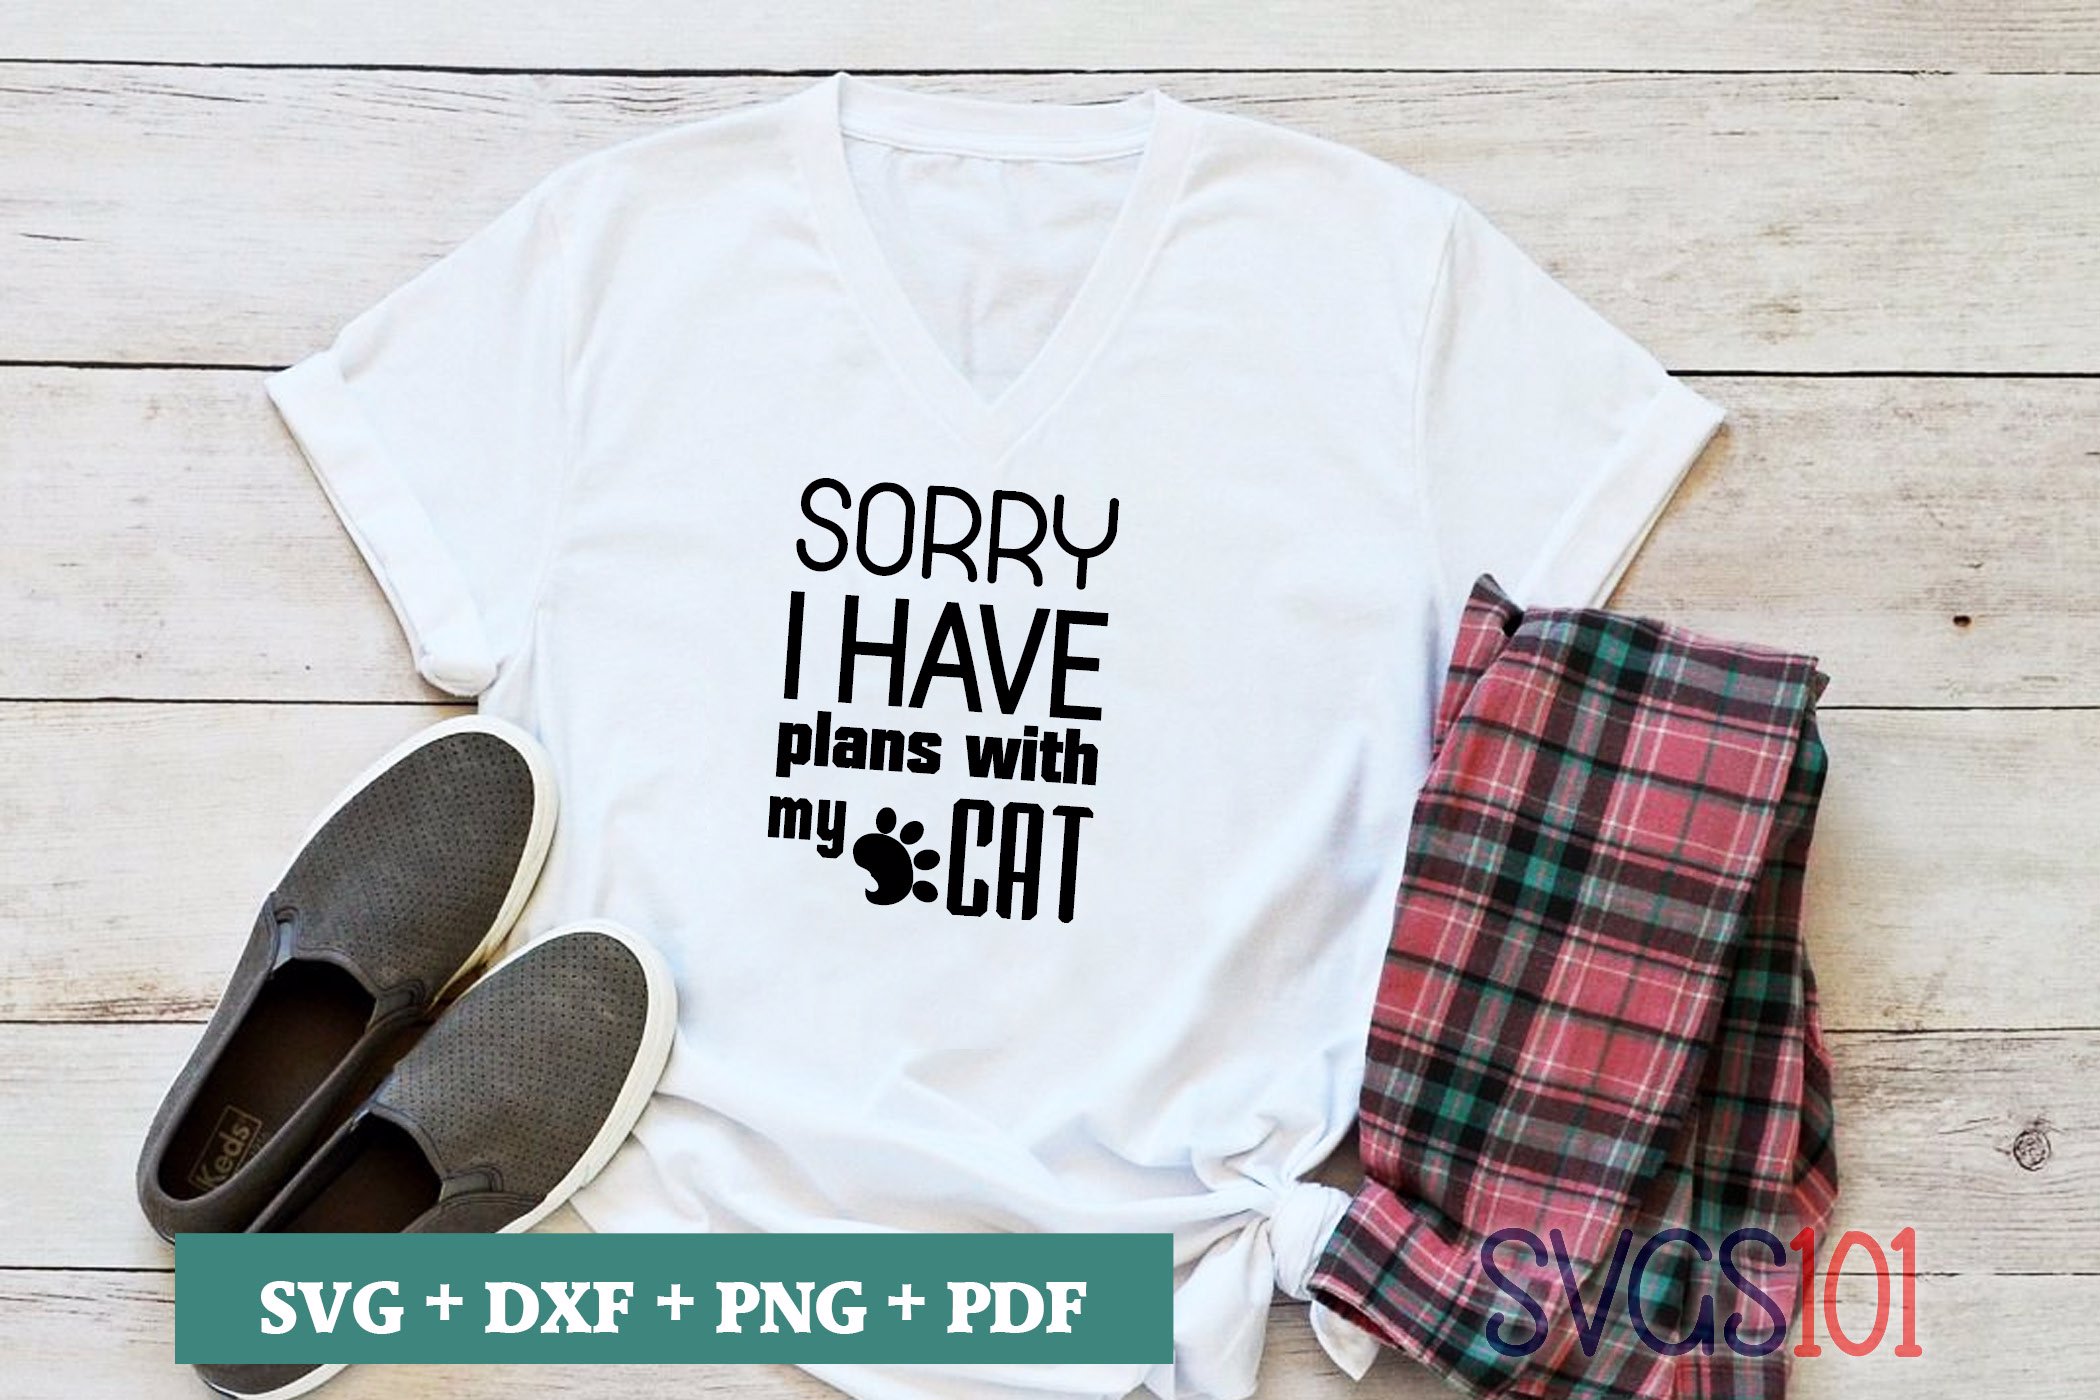 Sorry I have Plans with My Cat SVG Cuttable file - DXF, EPS, PNG, PDF ...